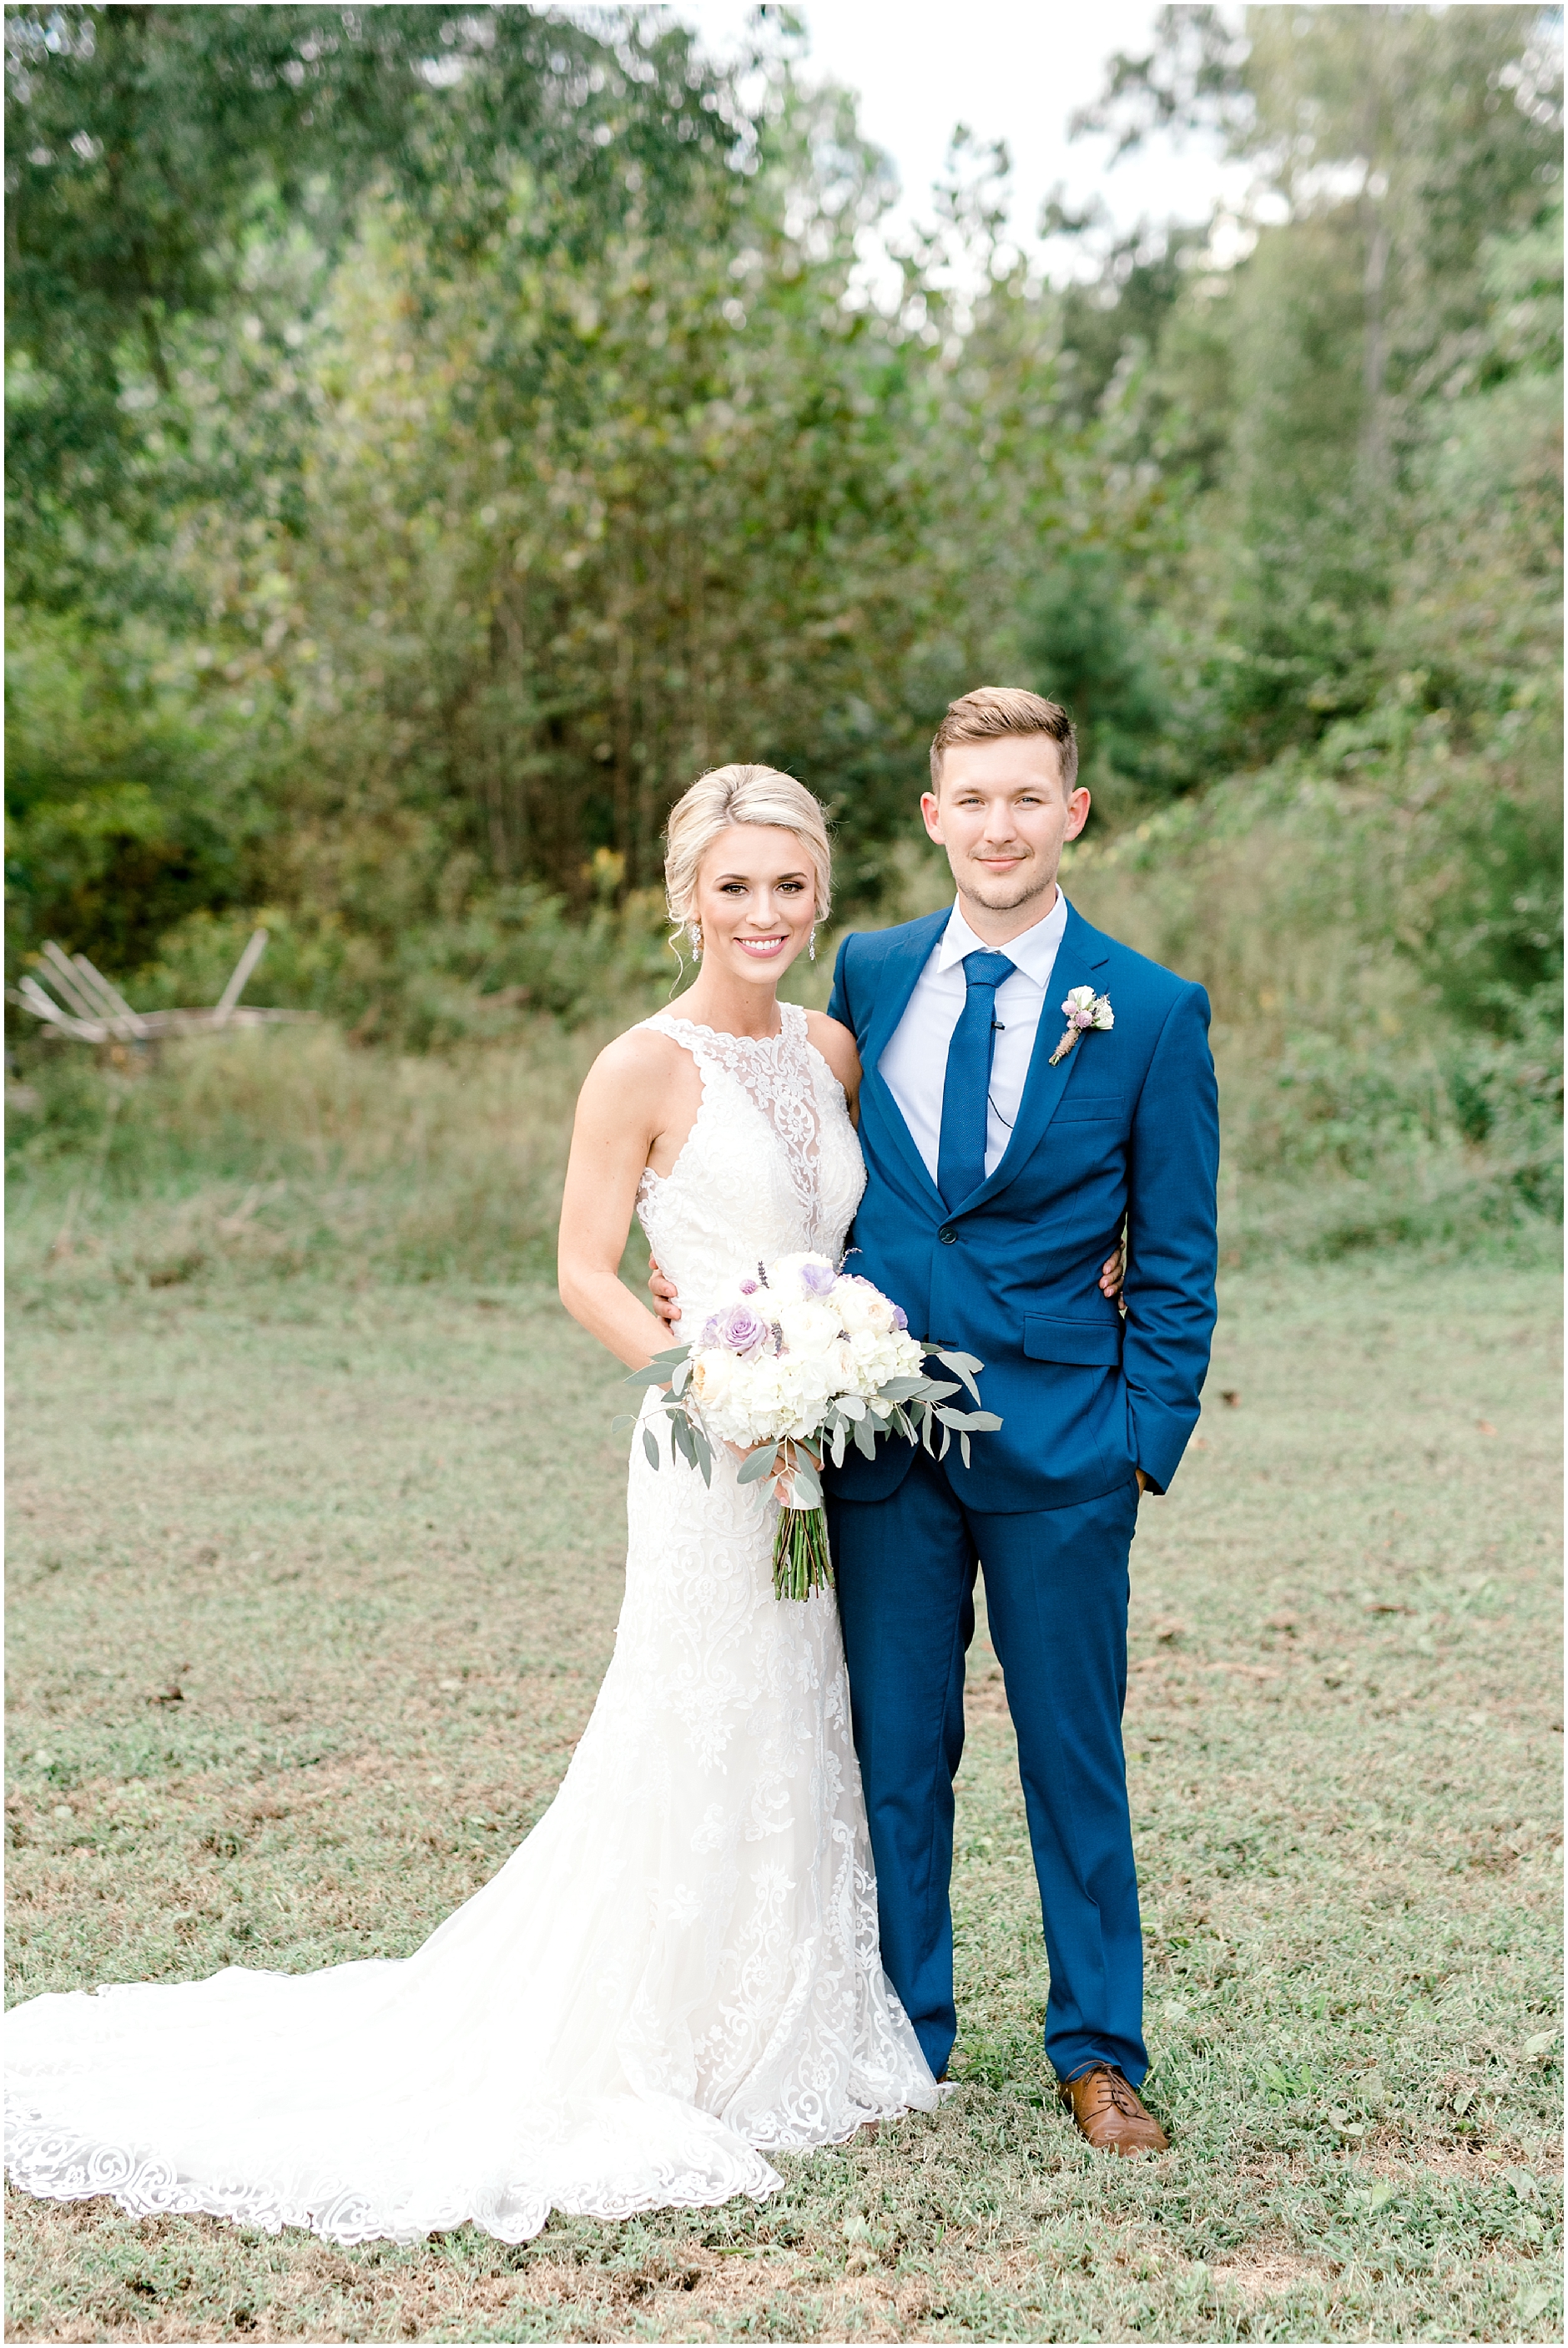 The_Hitchin_Post_Wedding_Katheryn_Jeanne_Photography